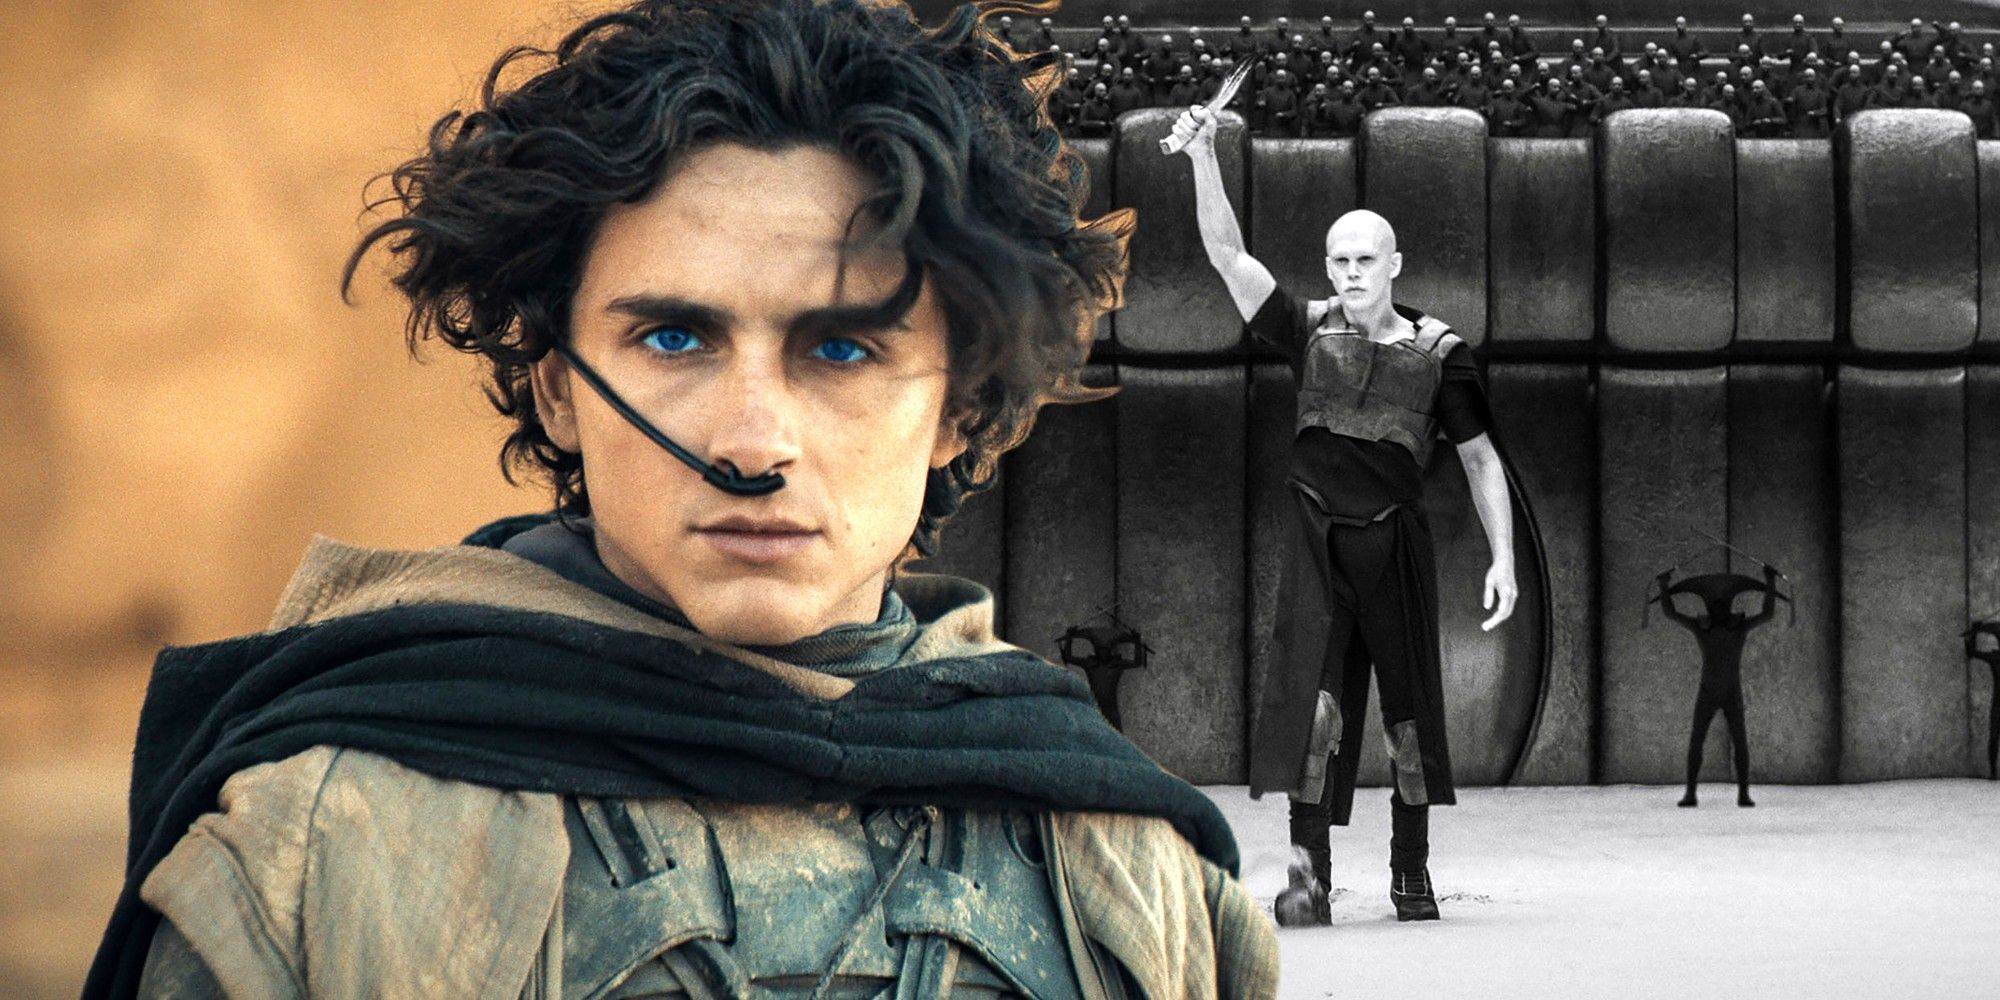 Timothee Chalamet as Paul in Dune 2 composited with Austin Butler as Feyd-Rautha raising a knife